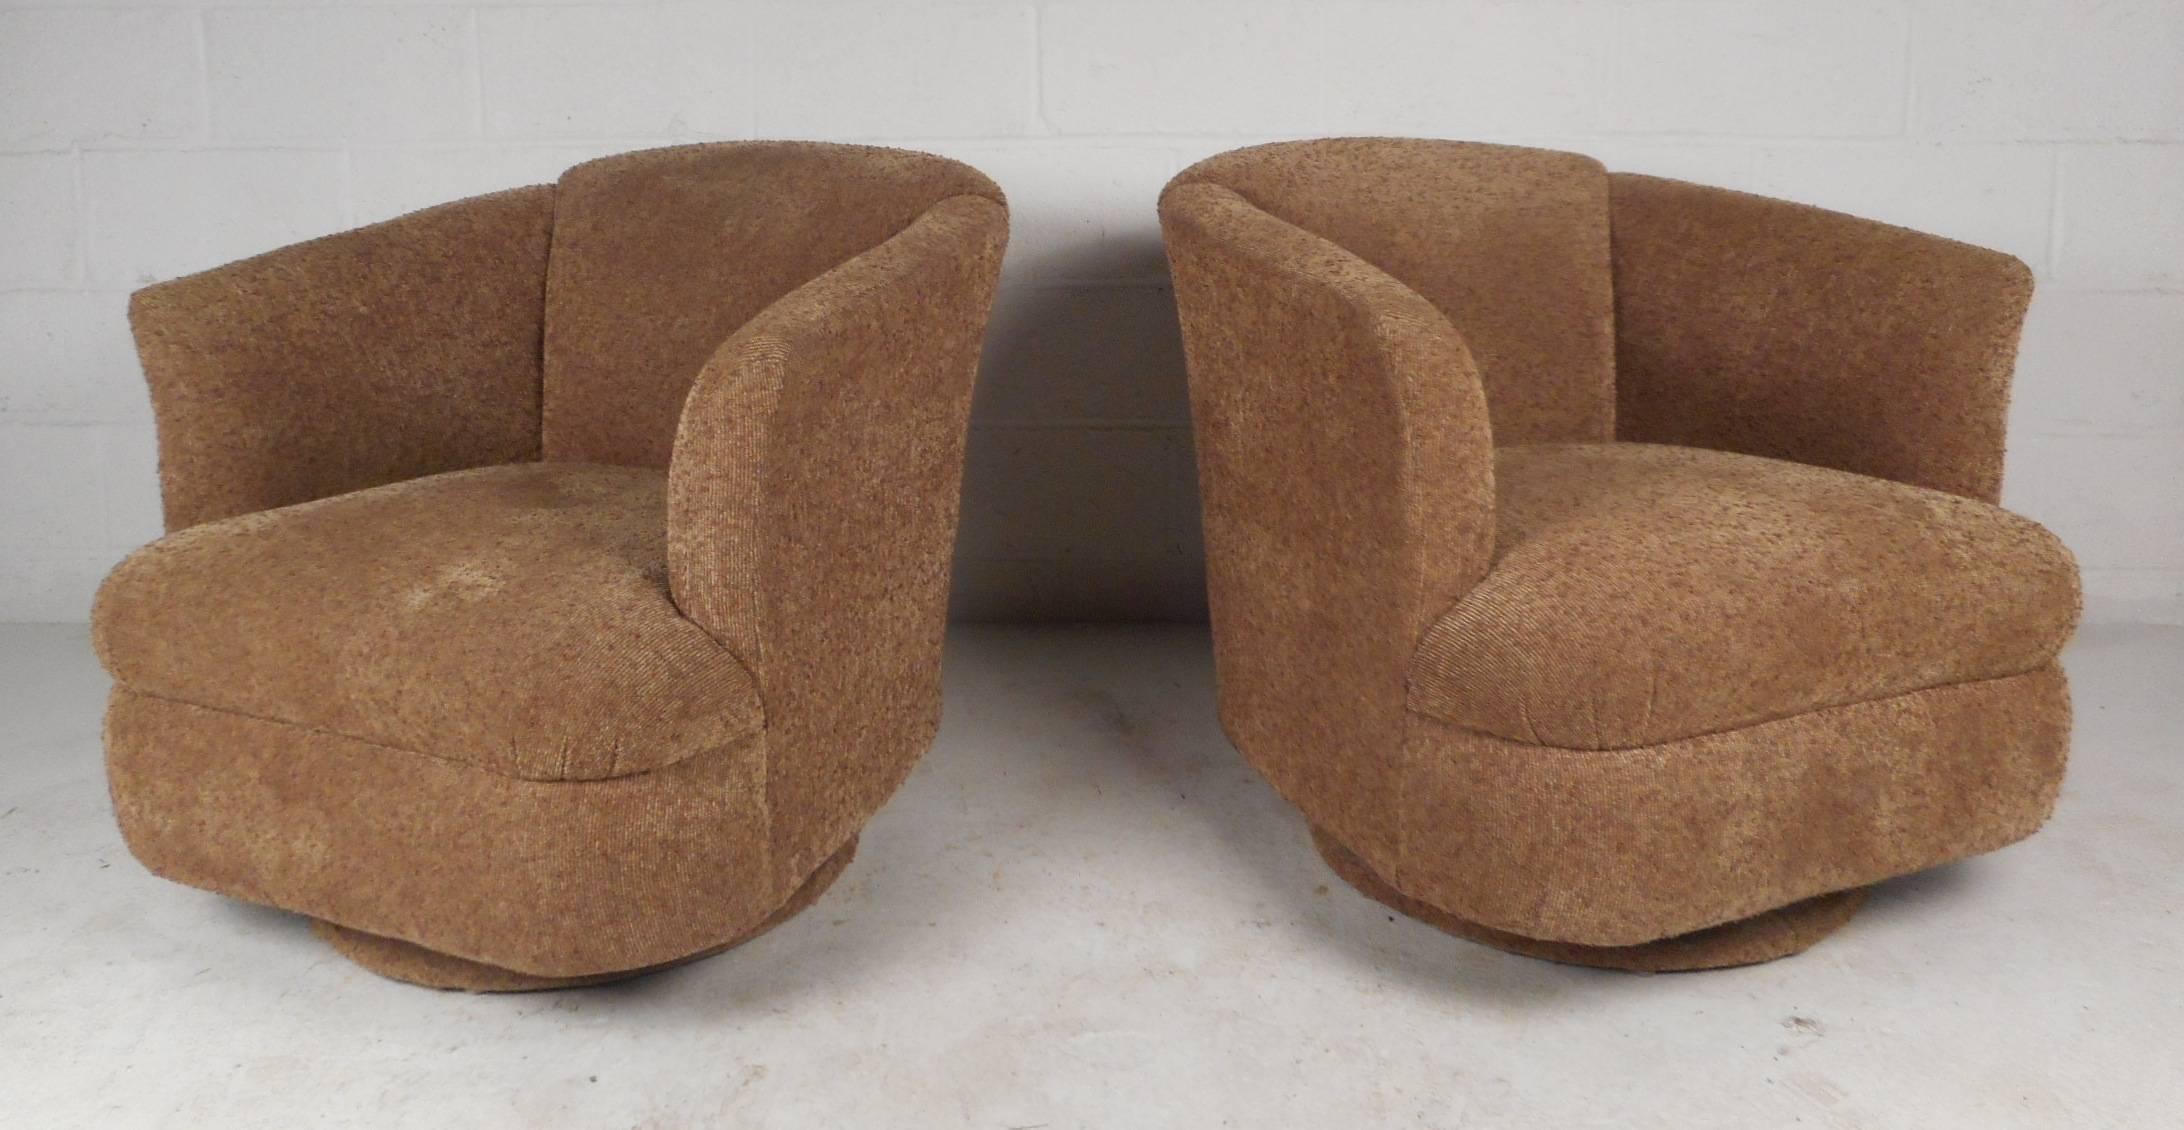 This stunning pair of vintage modern lounge chairs feature a barrel backrest and a swivel base. Unique design entirely covered in plush beige upholstery down to the base. These extremely comfortable chairs make the perfect addition to any seating